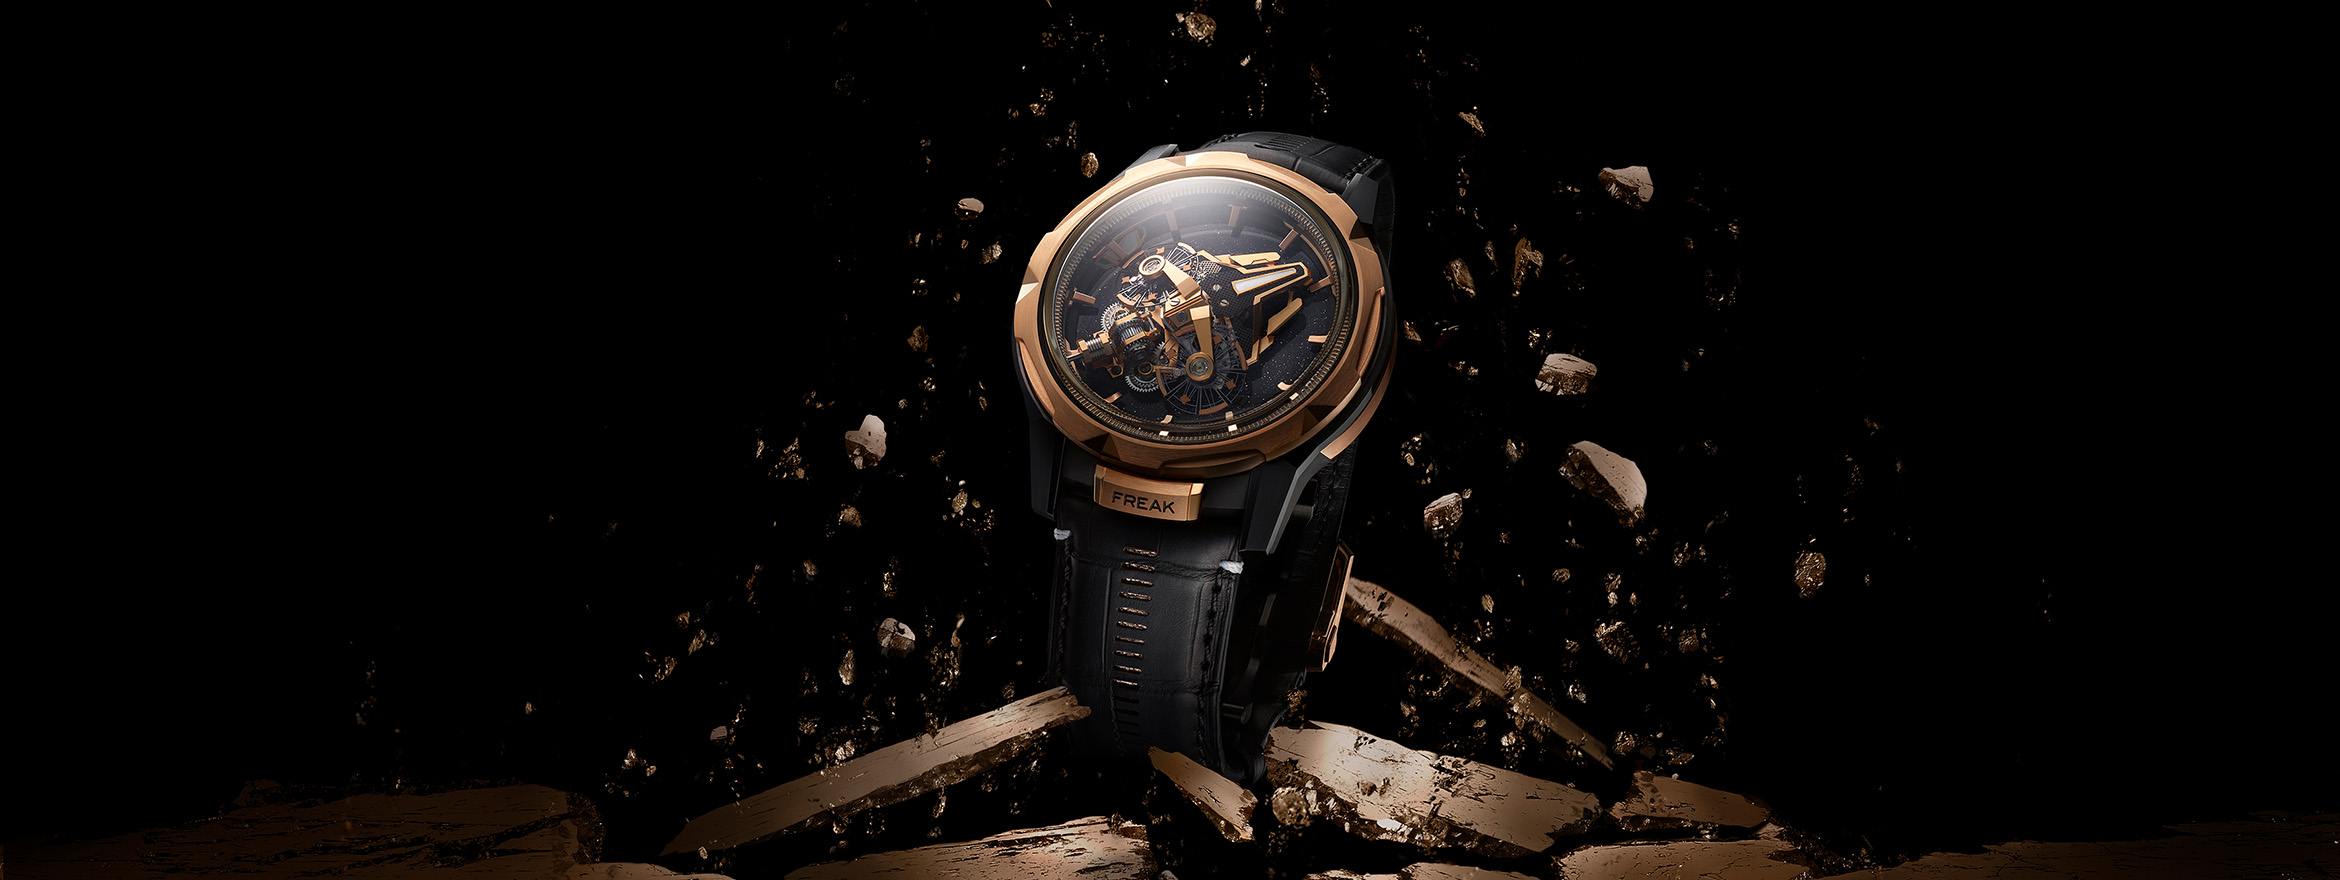 Vertical Odyssey Mission 2: The Latest Creations from Ulysse Nardin